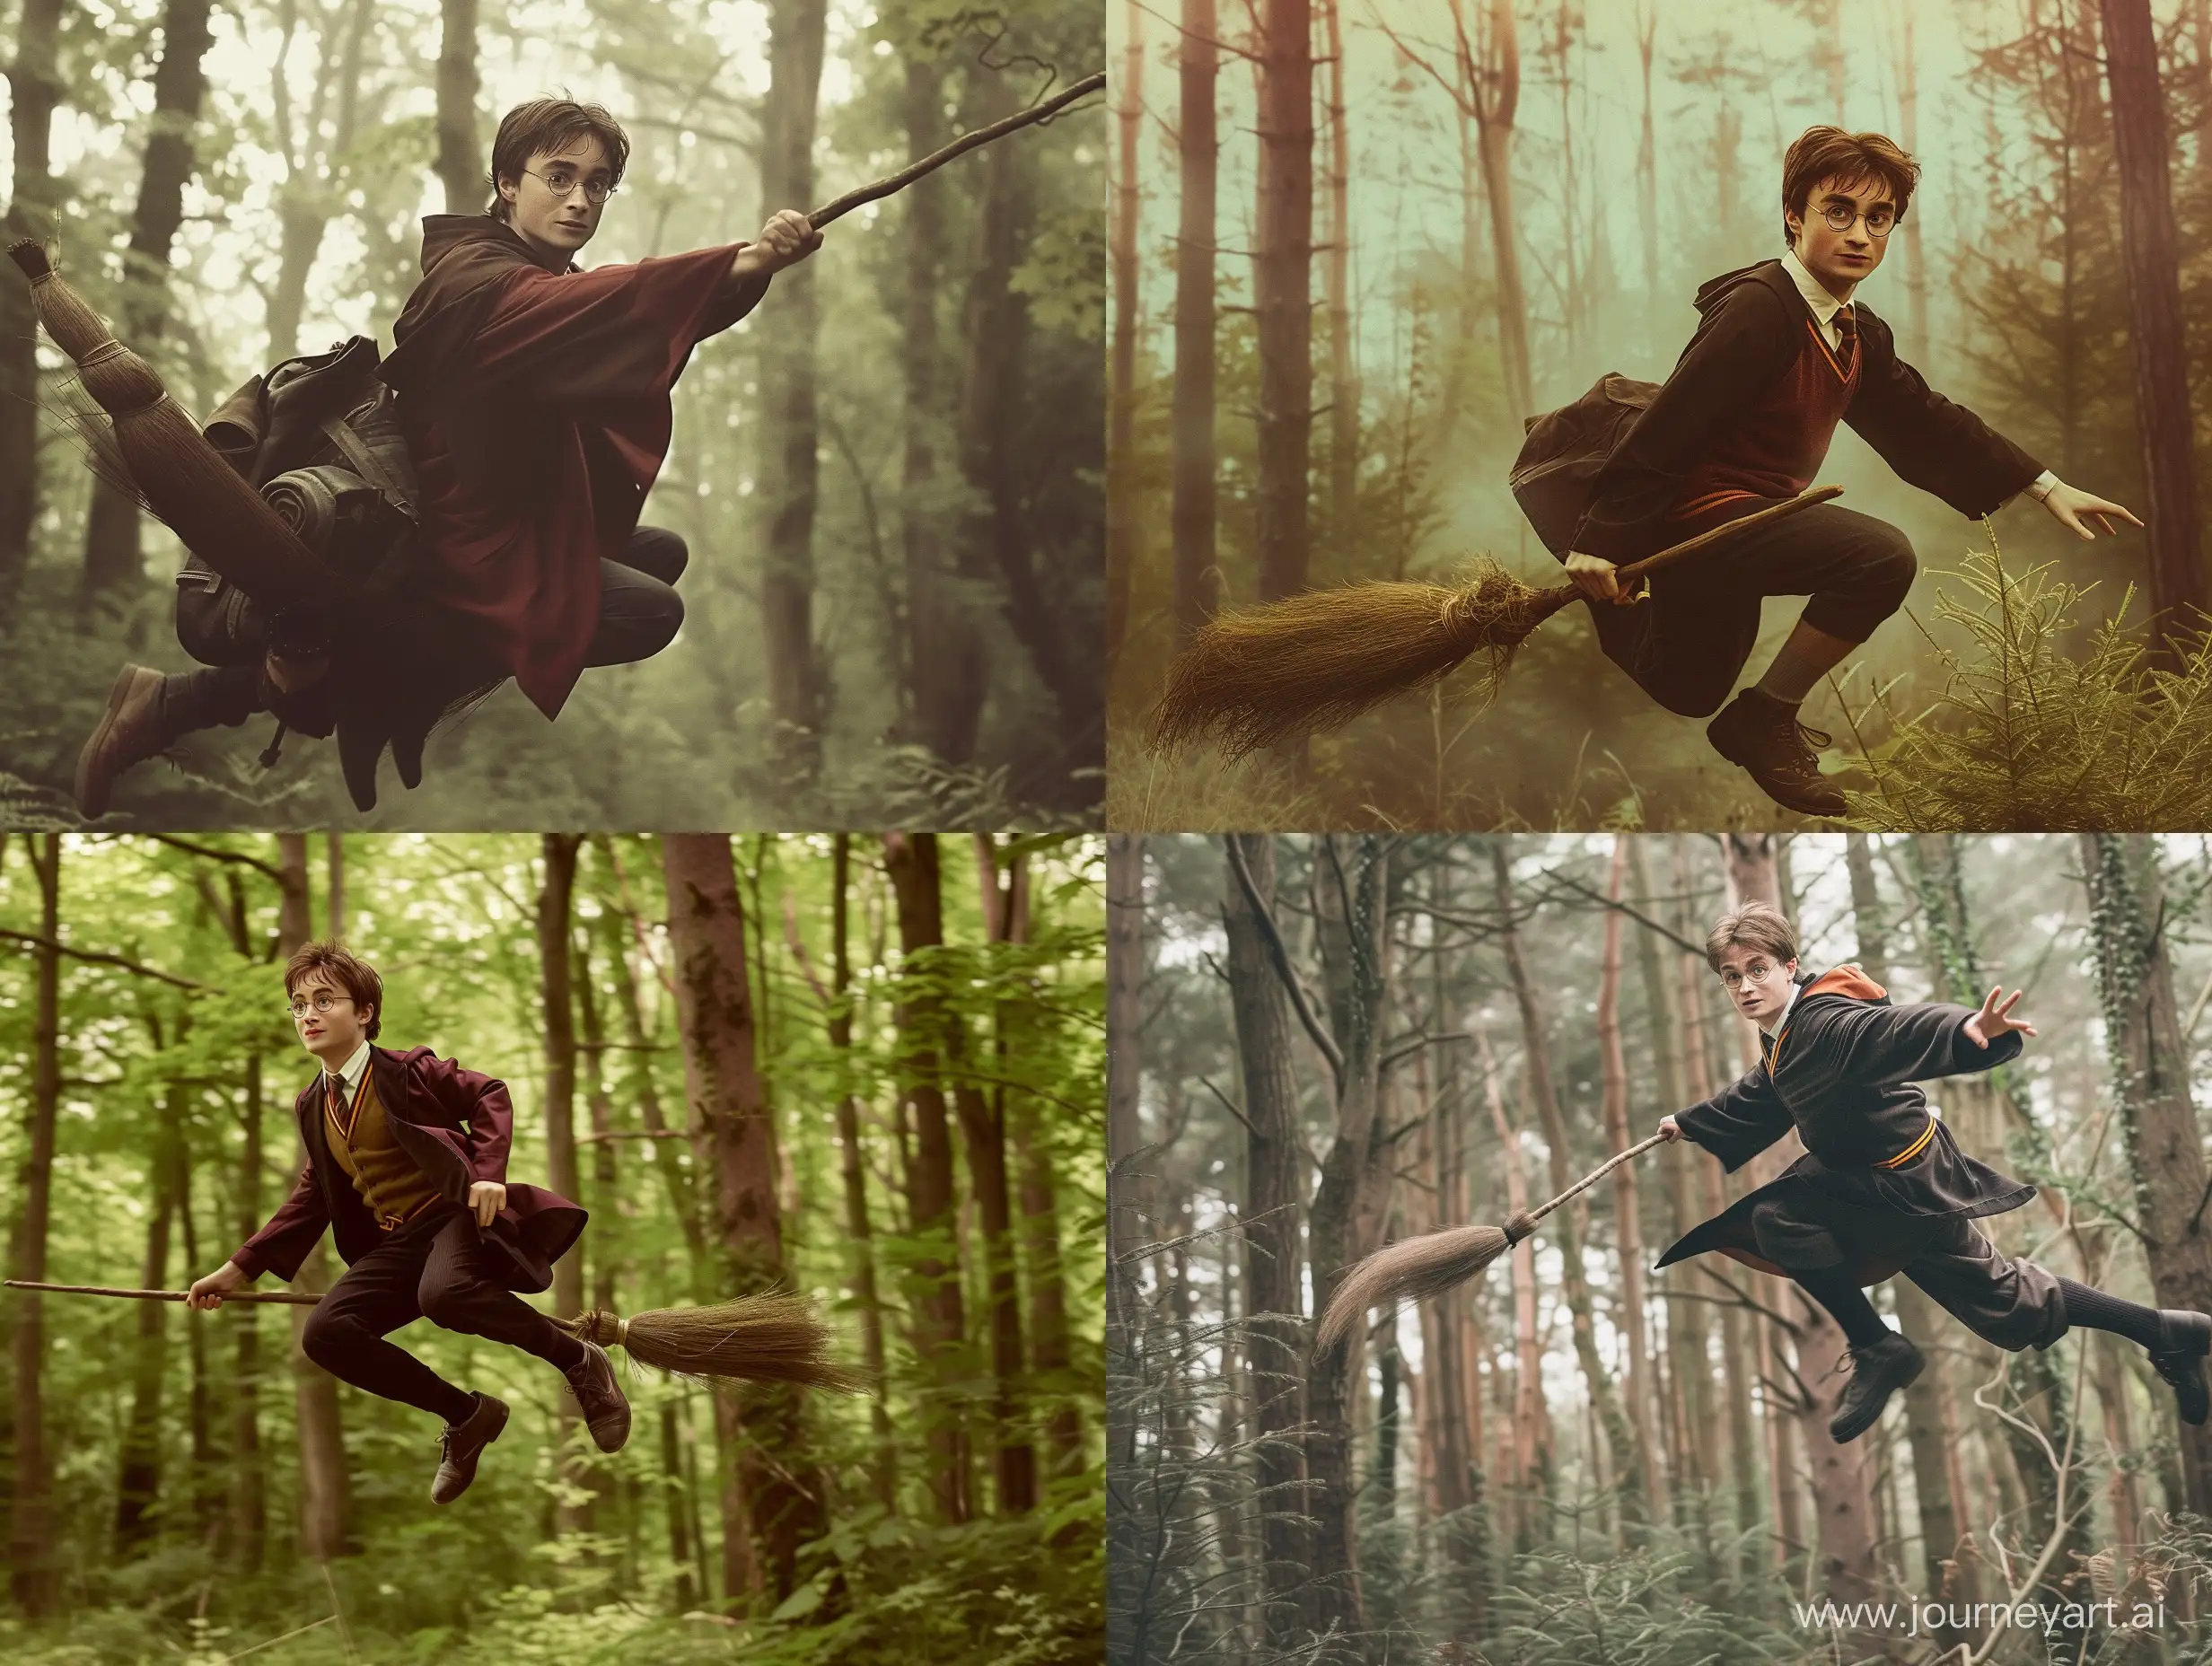 Wizardry-in-Action-Harry-Potter-Soars-on-Broomstick-Through-Enchanting-Forest